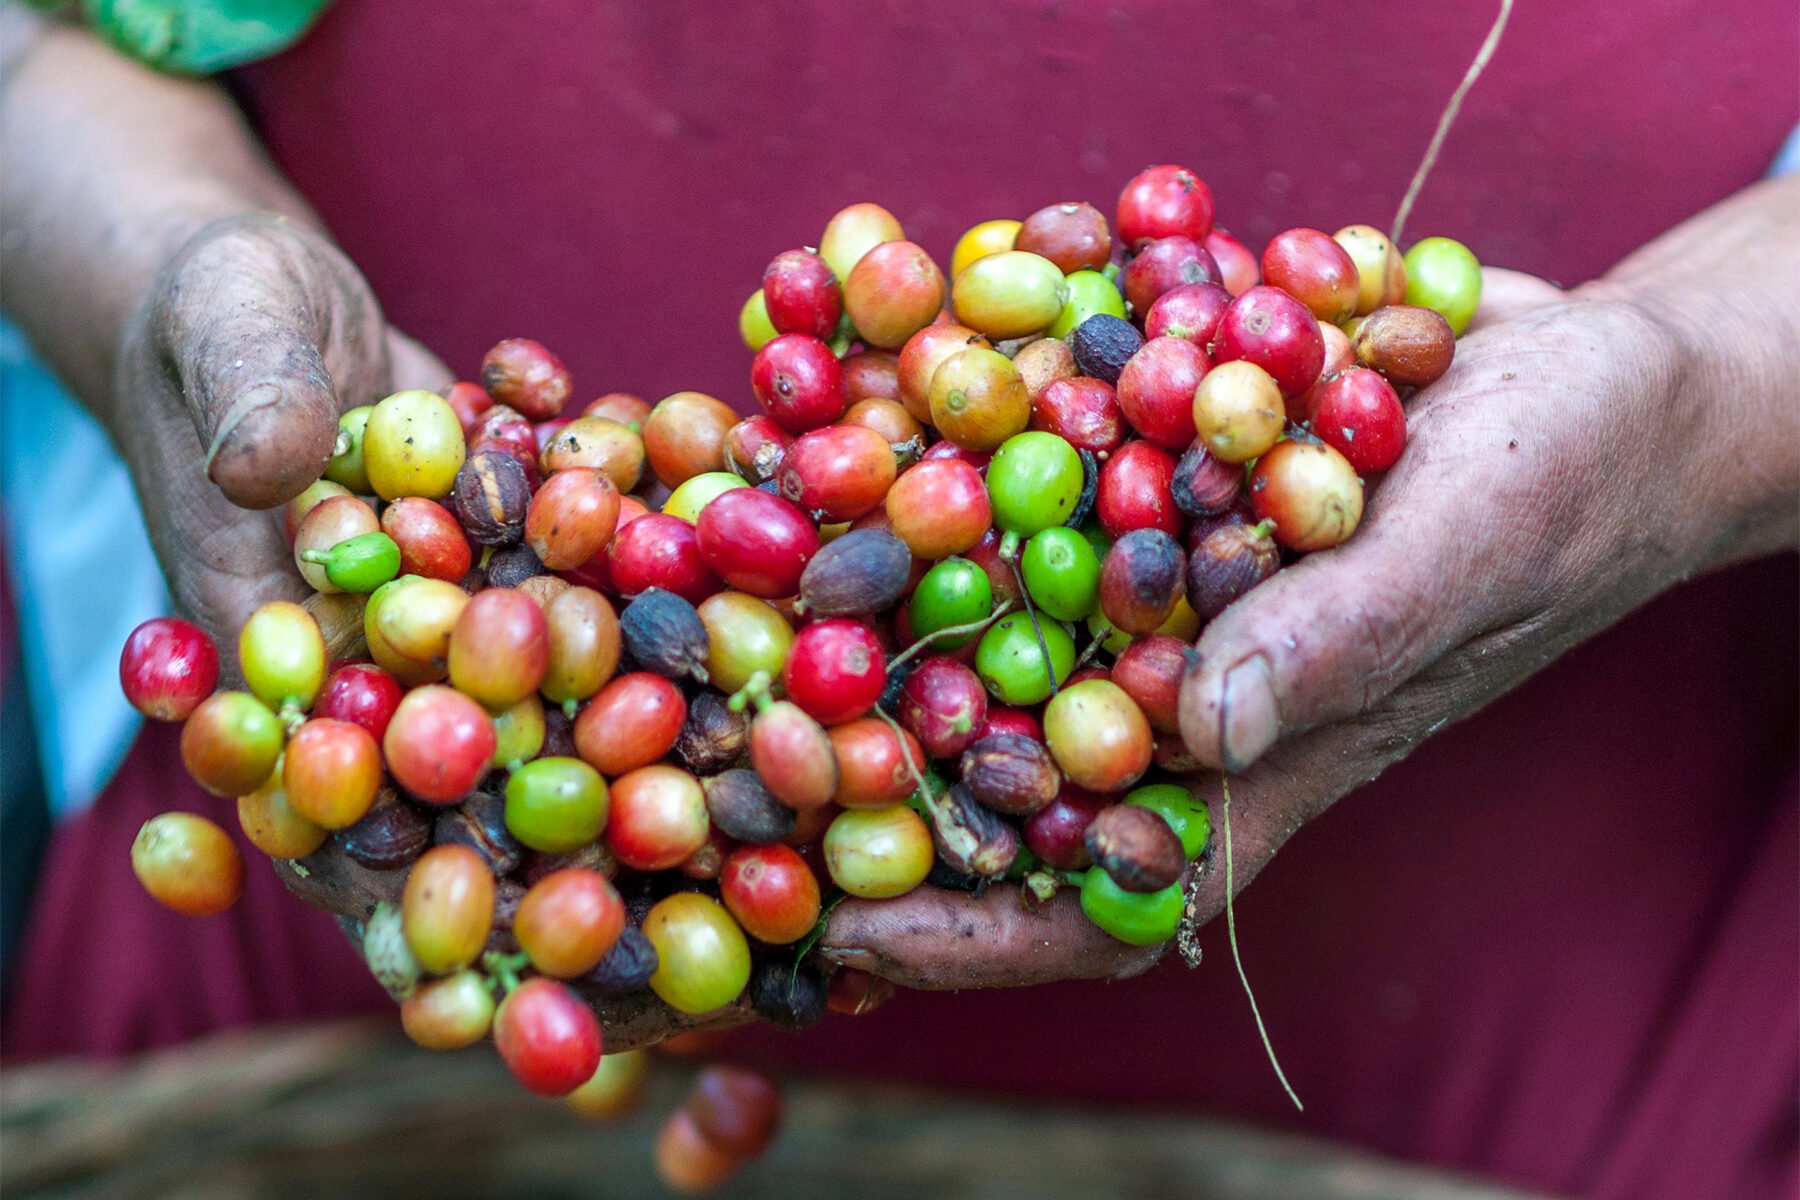 Coffee is able to play a role in the global development agenda by helping to lift the rural poor out of poverty through better coffee production. 